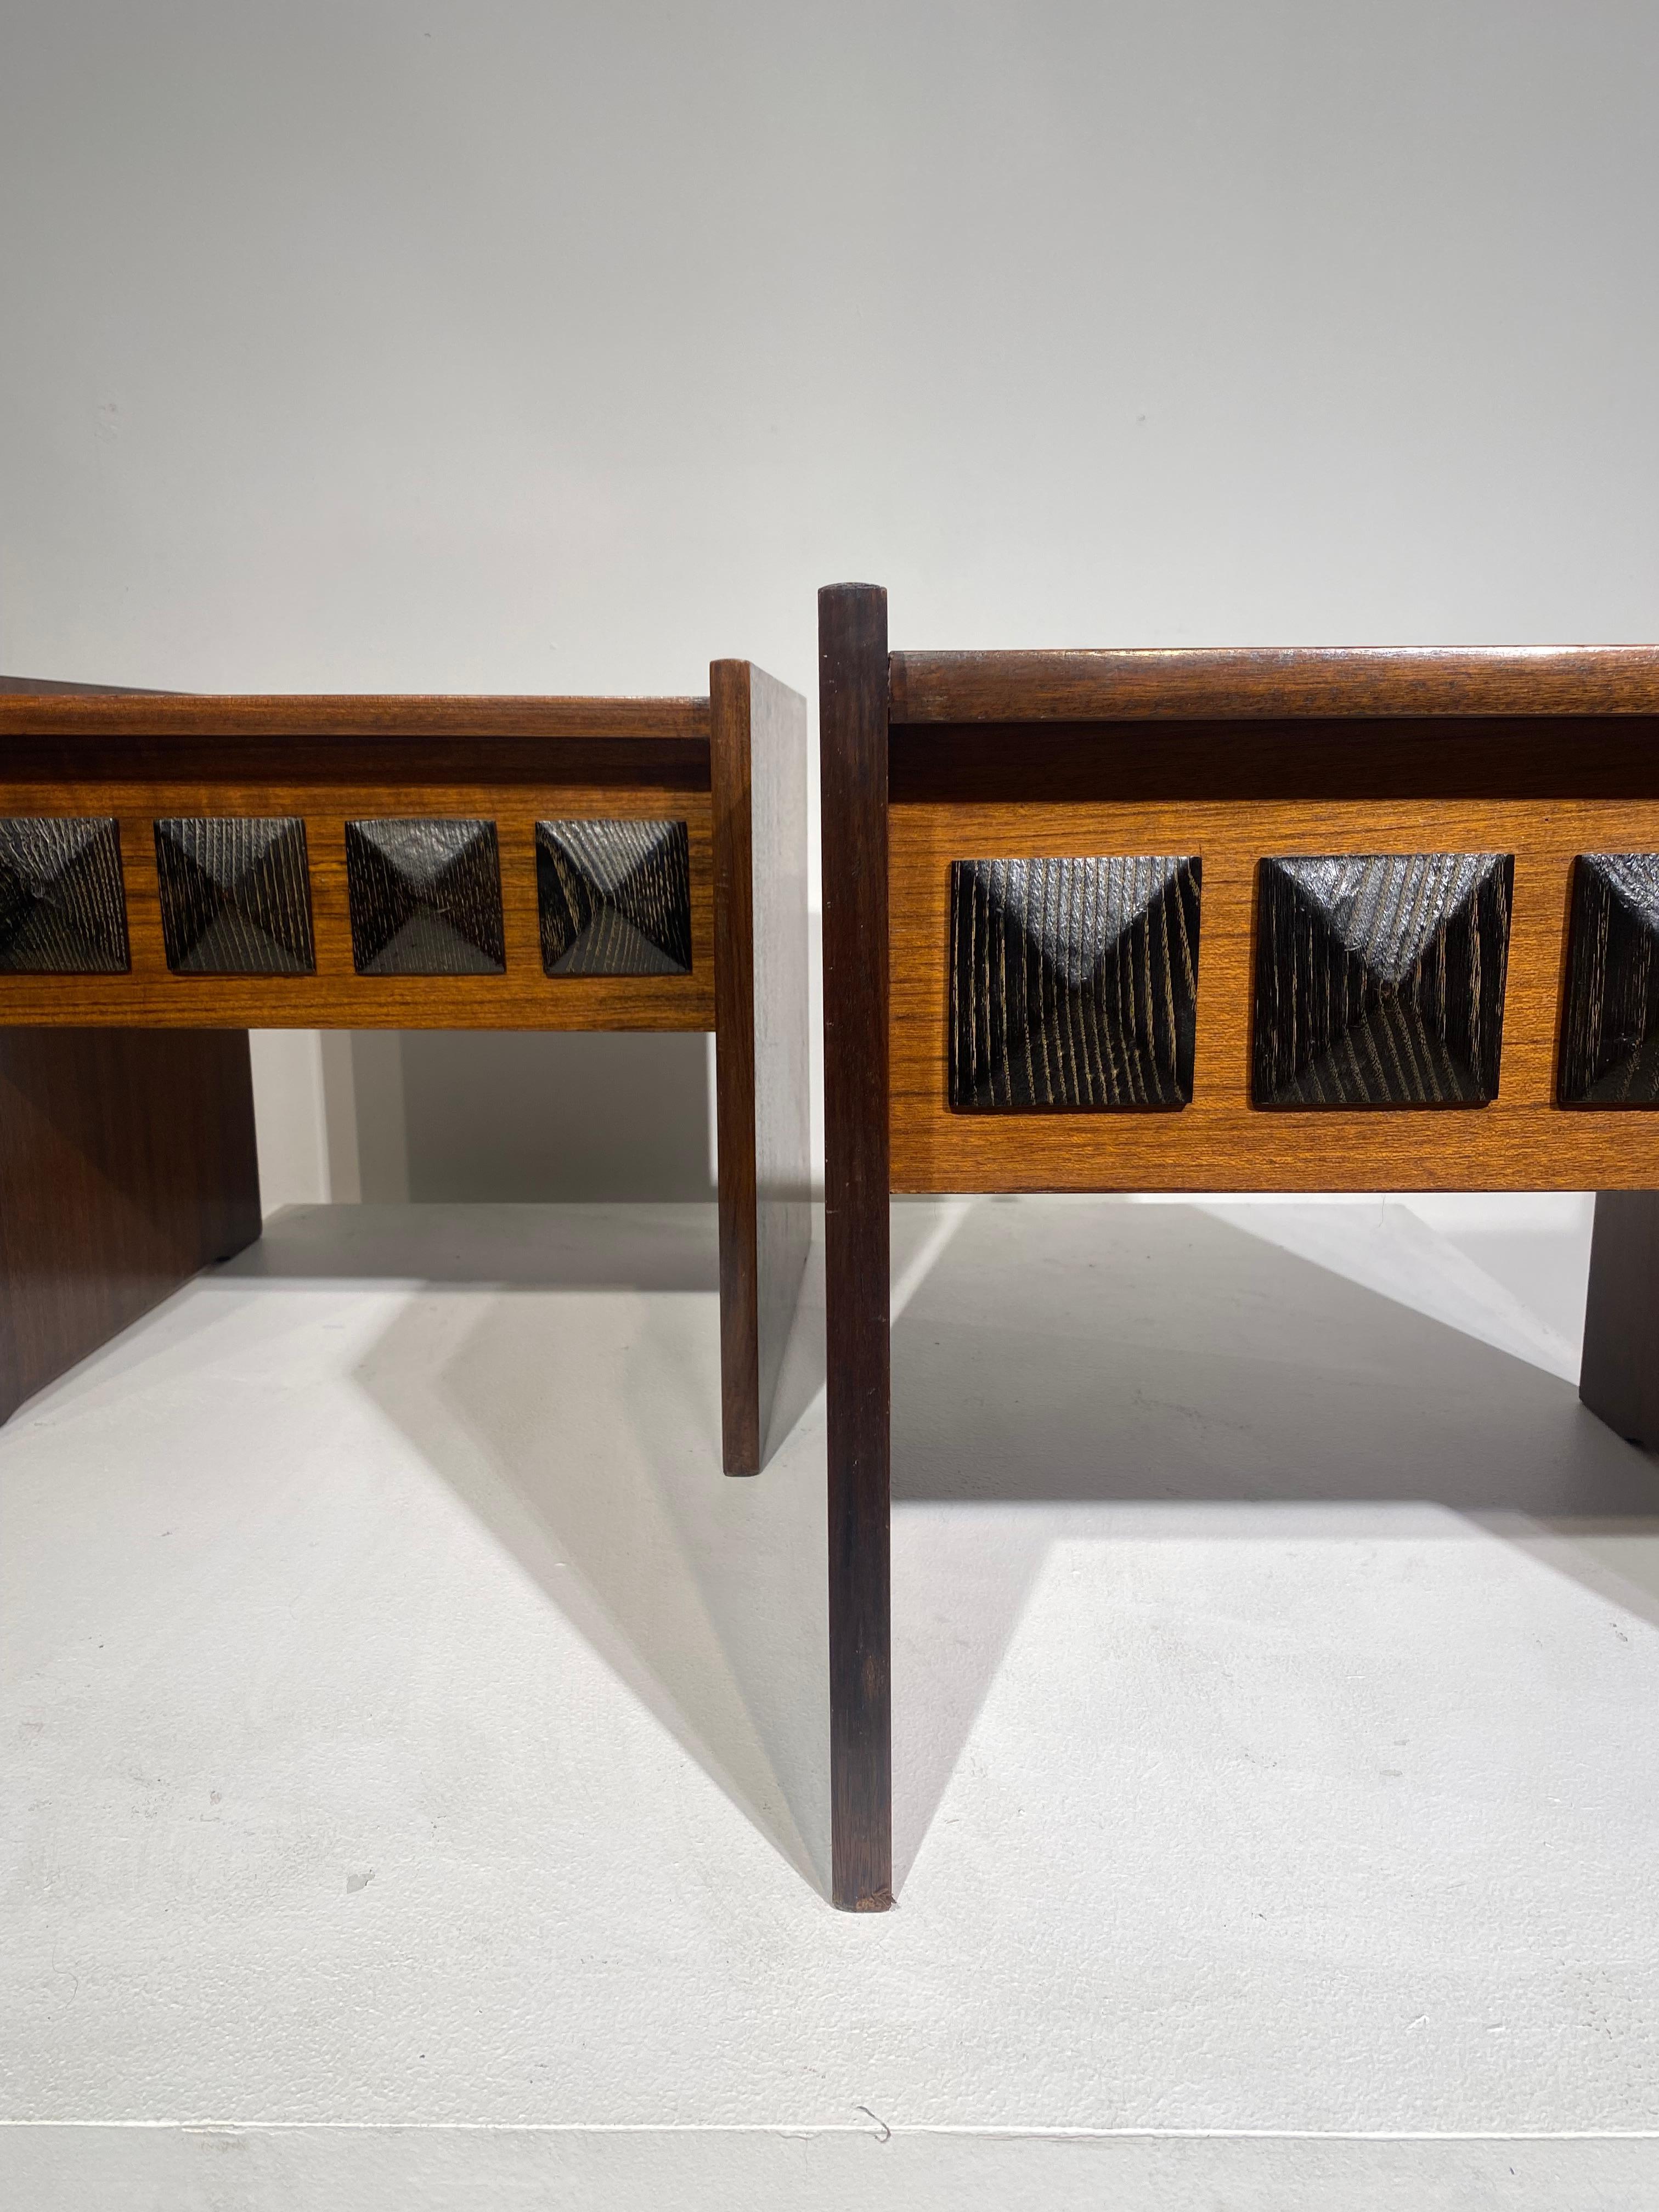 Nice pair of two side tables or bedsides tables with brutalist decor on the front part. They are no drawers. Really elegant work with two tones of wood, typical of brutalist style of design furniture in Europe during 60s and 70s. Those pieces